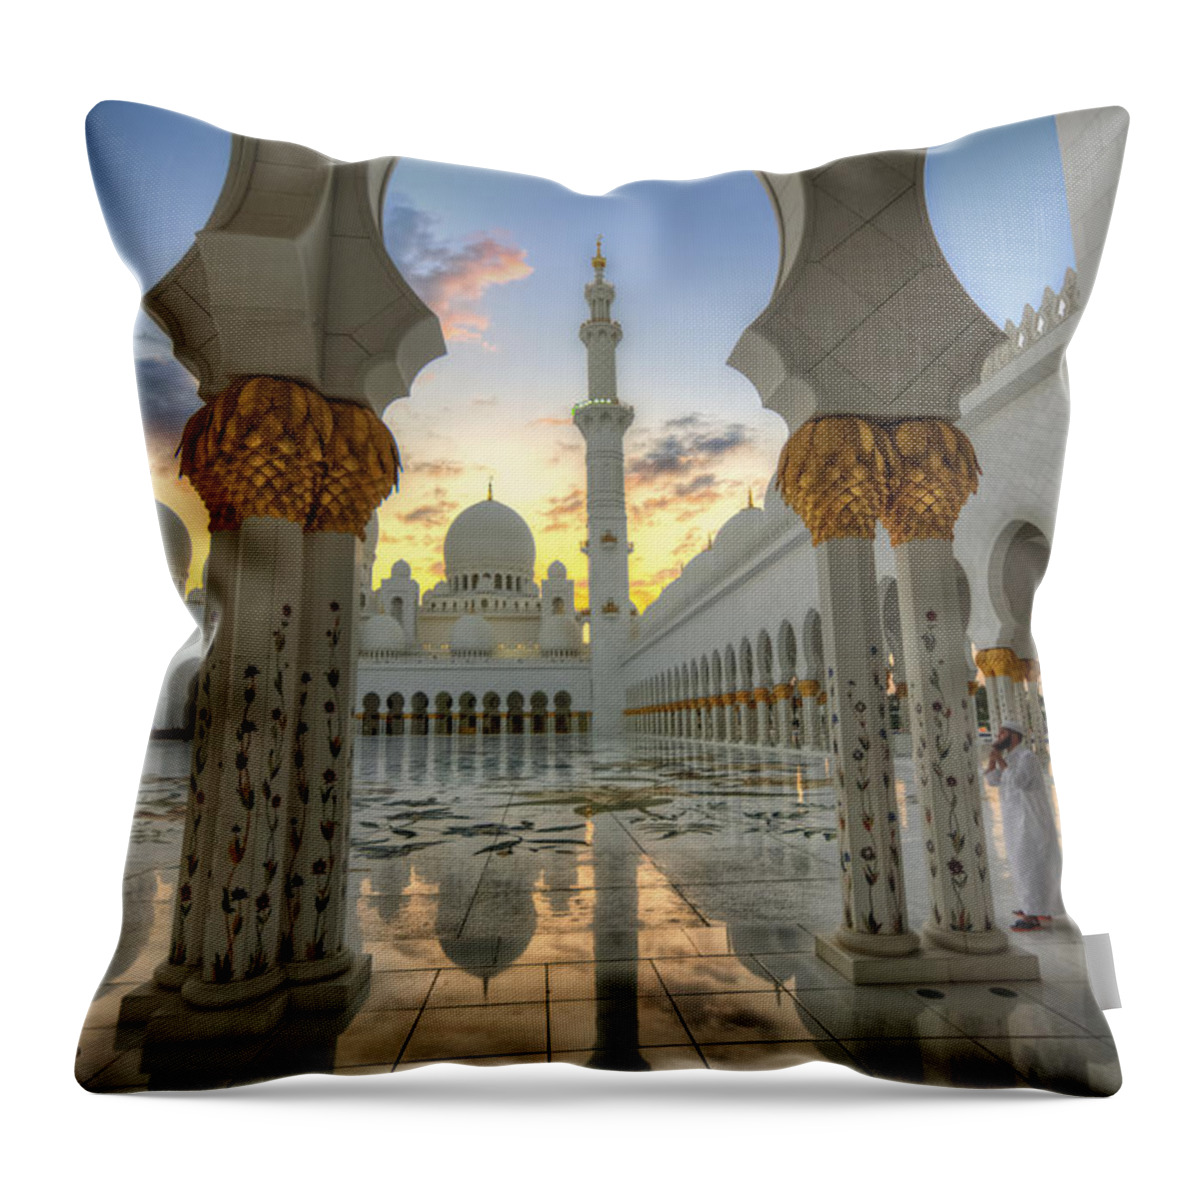 Abstract Throw Pillow featuring the photograph Arch Sunset Temple by John Swartz